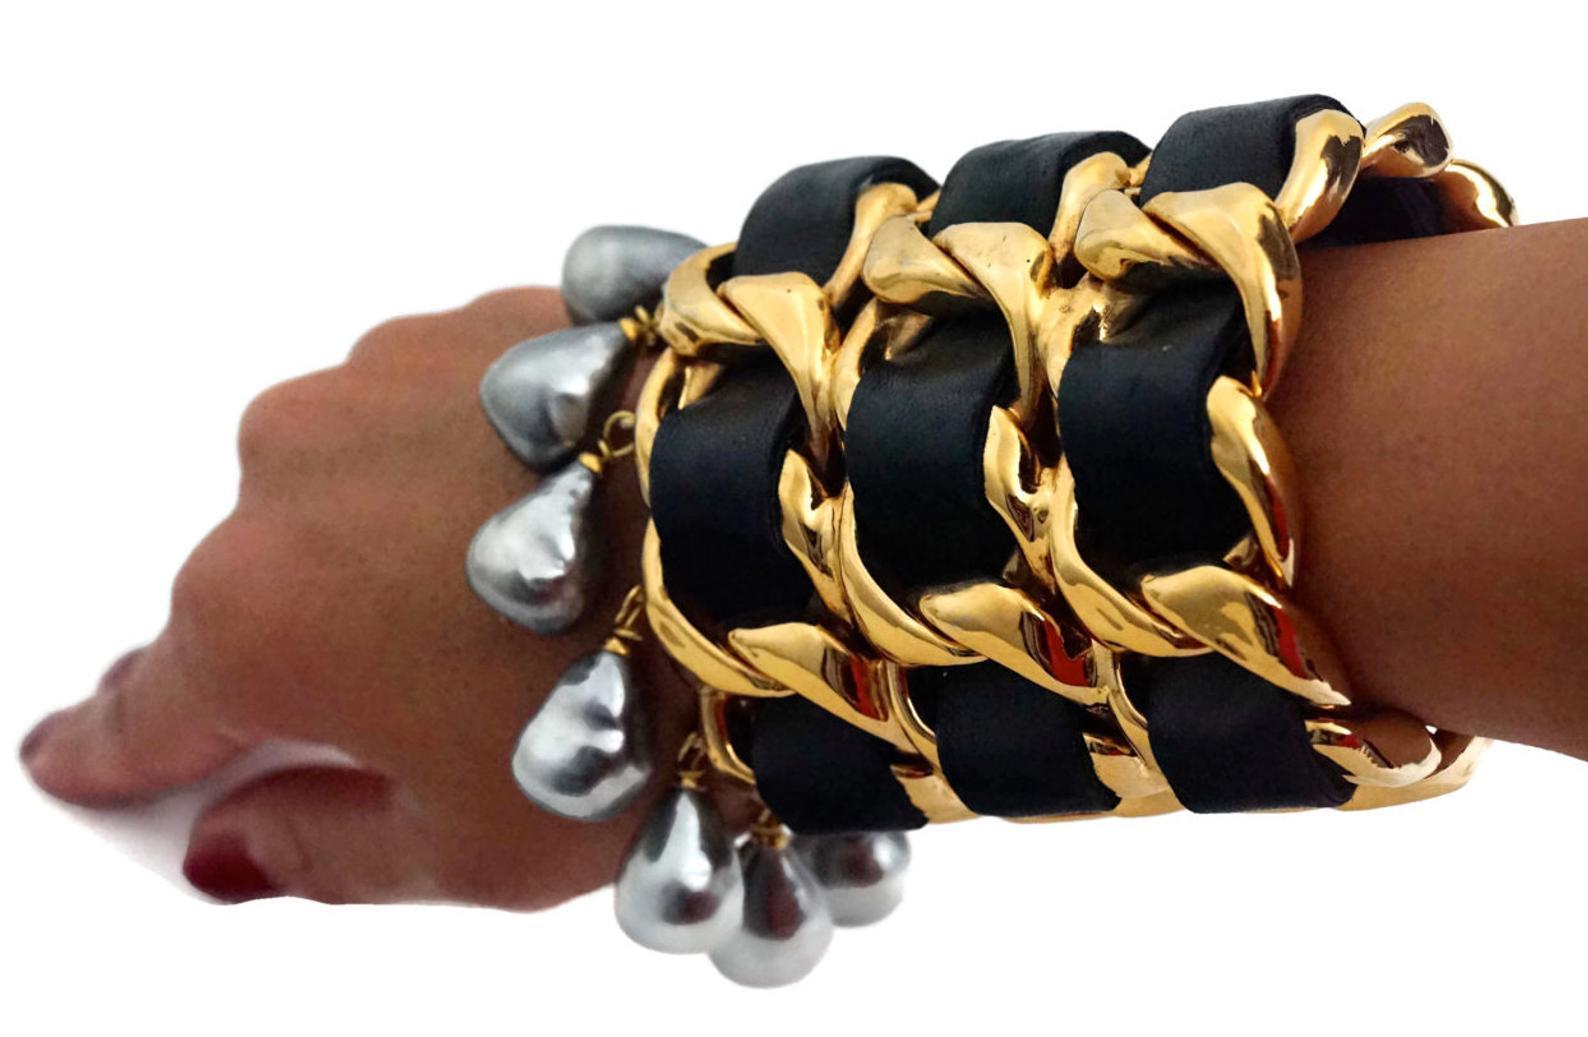 CHANEL Iconic Triple Chain Leather Pearl Drop Cuff Bracelet

Measurements:
Height: 4 4/8 inches
Opening: 1 2/8 inches
Inside Circumference: 7 inches

Features:
- 100% Authentic CHANEL.
- Chunky 3 tiered woven chain and black leather.
- Dangling